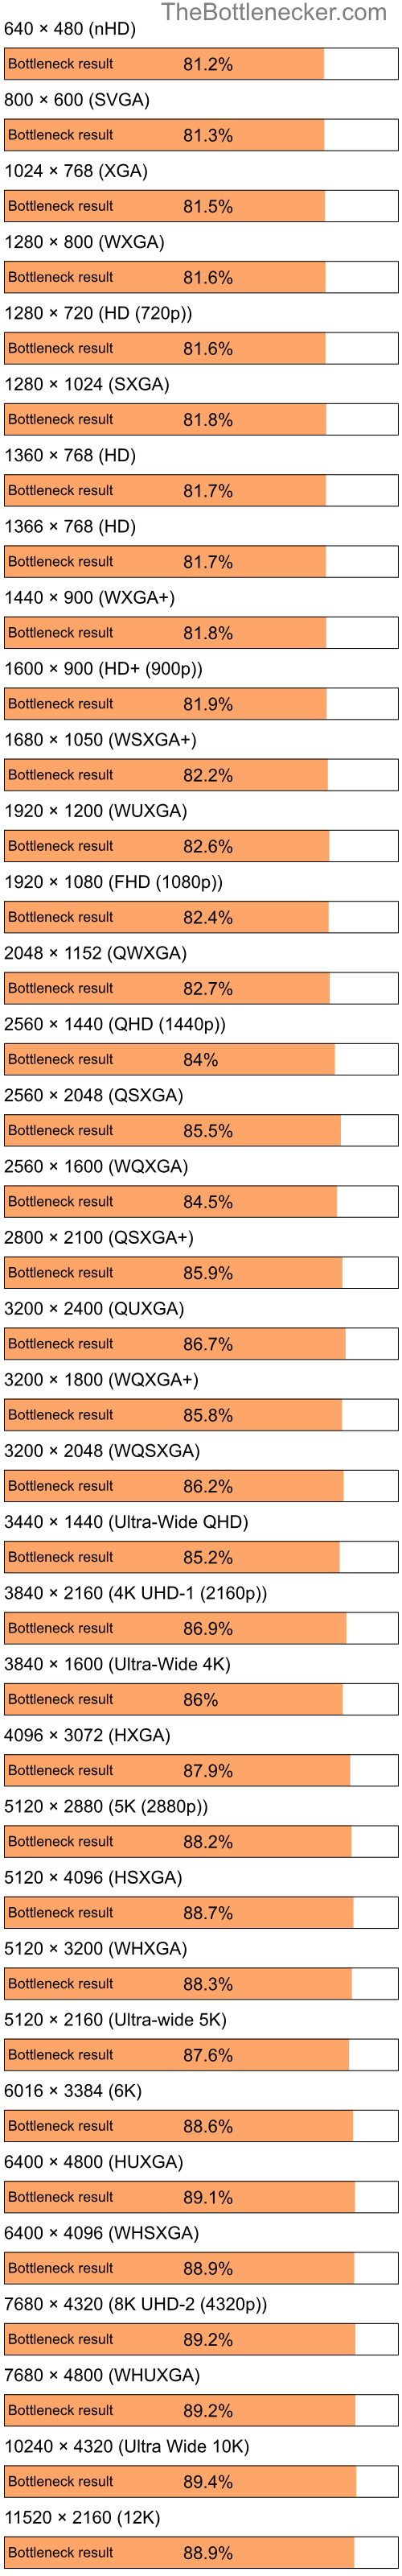 Bottleneck results by resolution for Intel Pentium 4 and NVIDIA GeForce 7200 GS in Graphic Card Intense Tasks